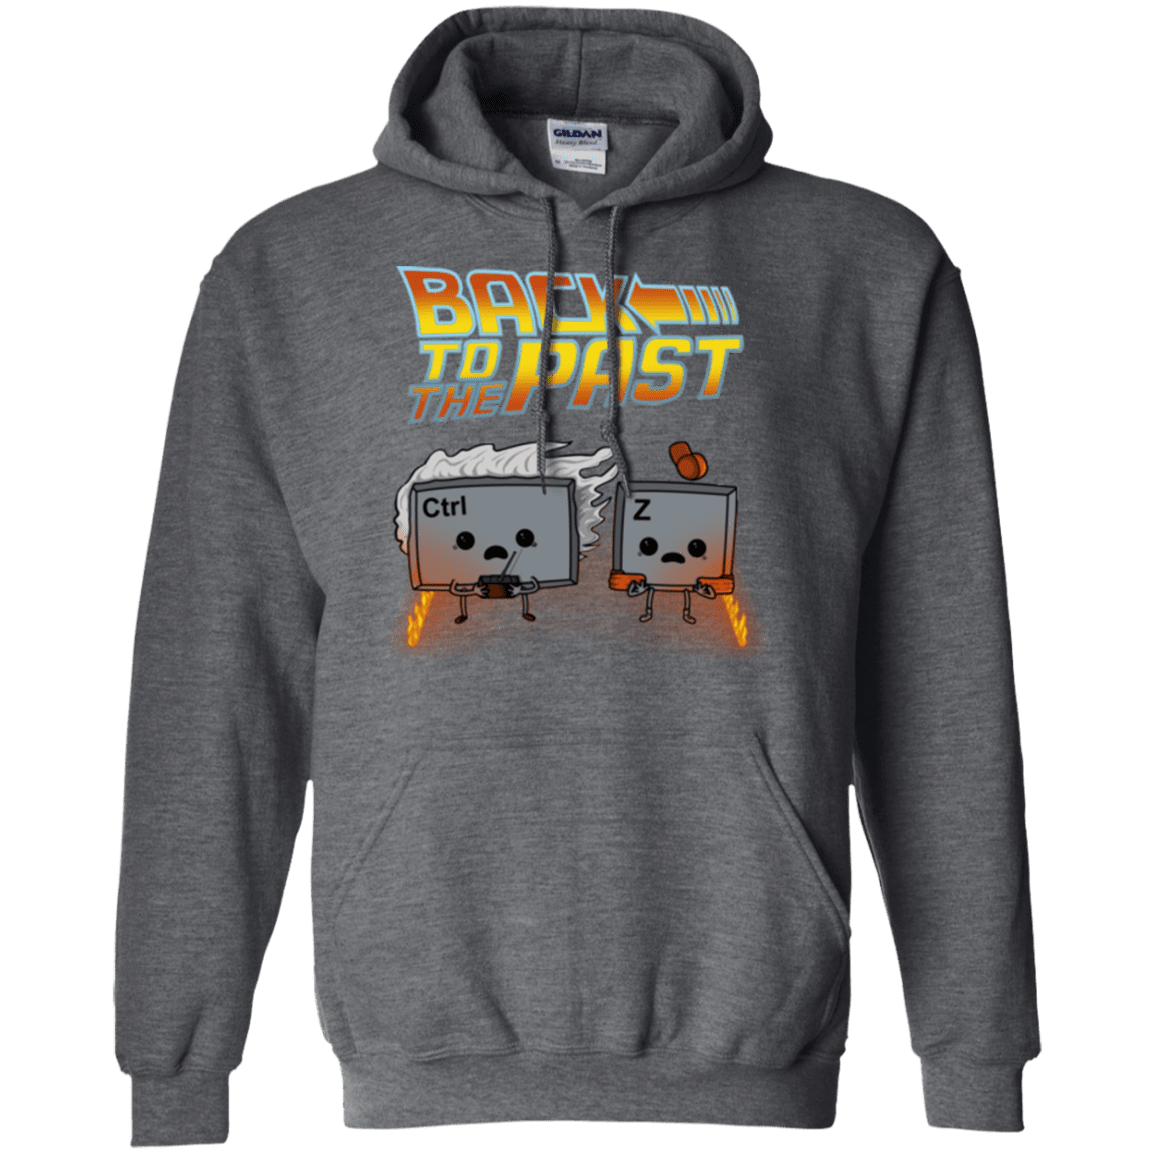 Sweatshirts Dark Heather / Small Back To The Past Pullover Hoodie